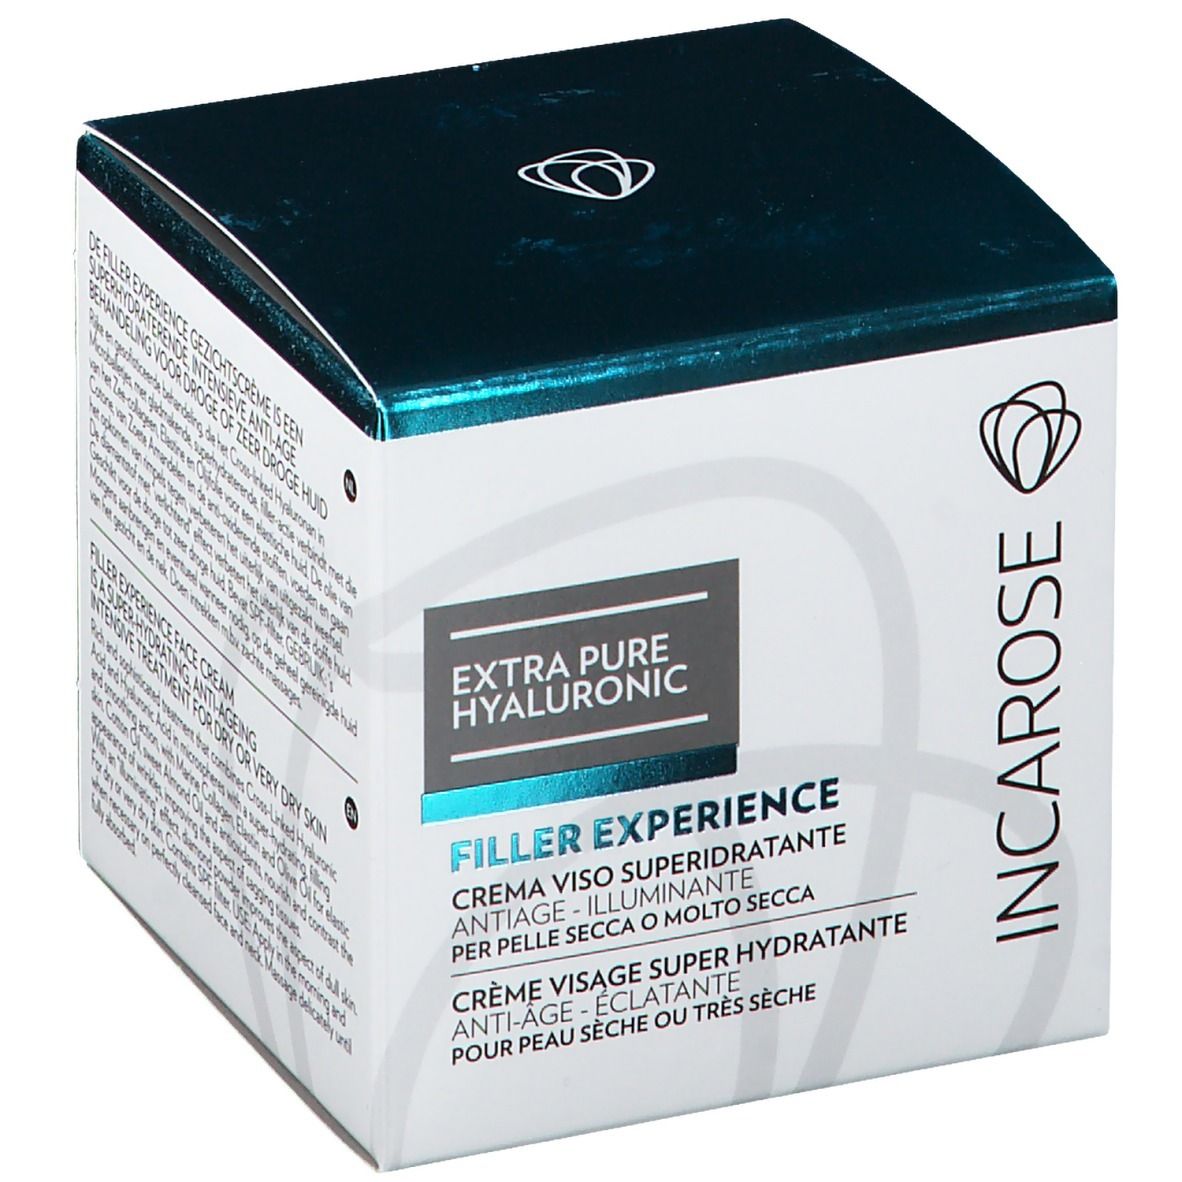 Image of Incarose® Extra Pure Hyaluronic Filler Experience Super Hydrating Anti-Aging Gesichtscreme